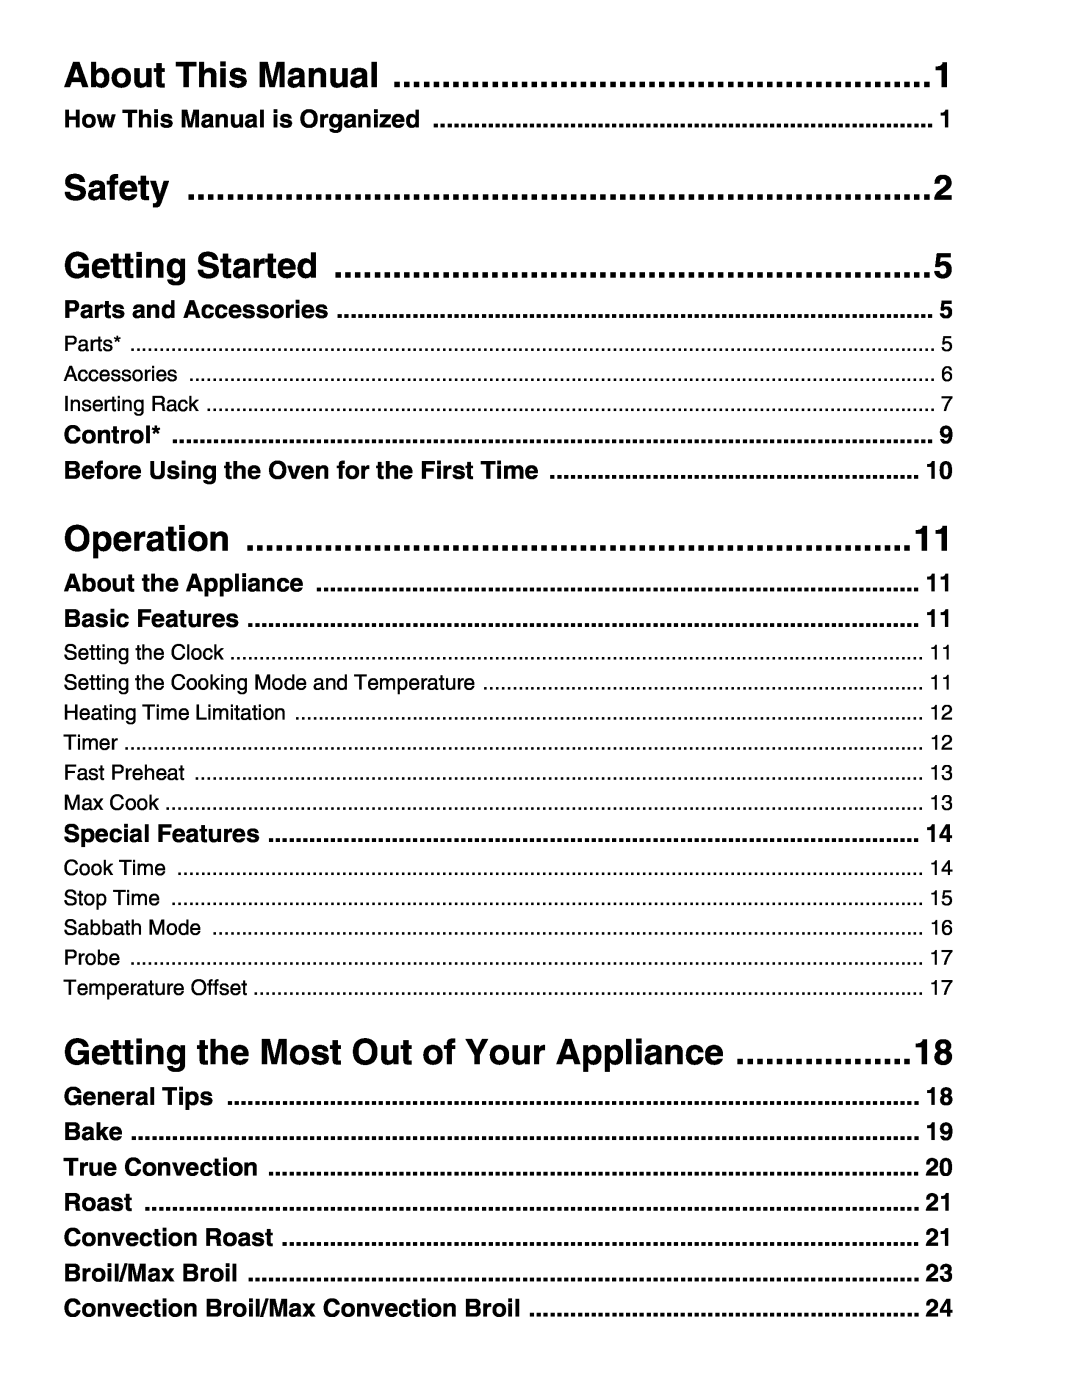 Thermador POD 302 manual About This Manual, Safety, Getting Started, Operation, Getting the Most Out of Your Appliance 